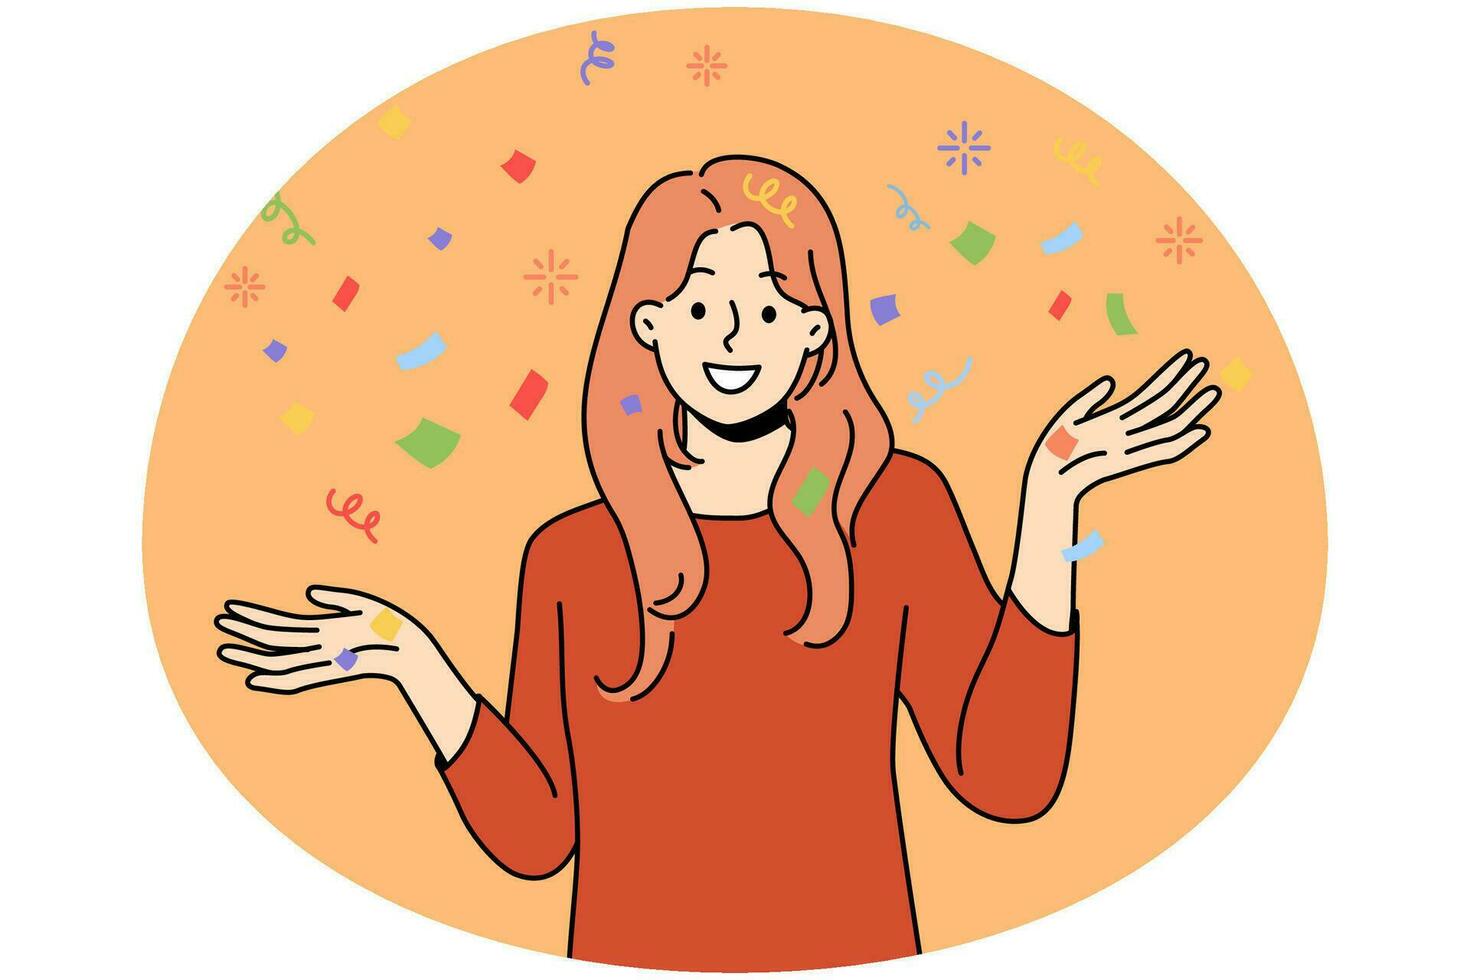 Smiling young woman with confetti have fun celebrating. Happy girl enjoy party or celebration. Vector illustration.